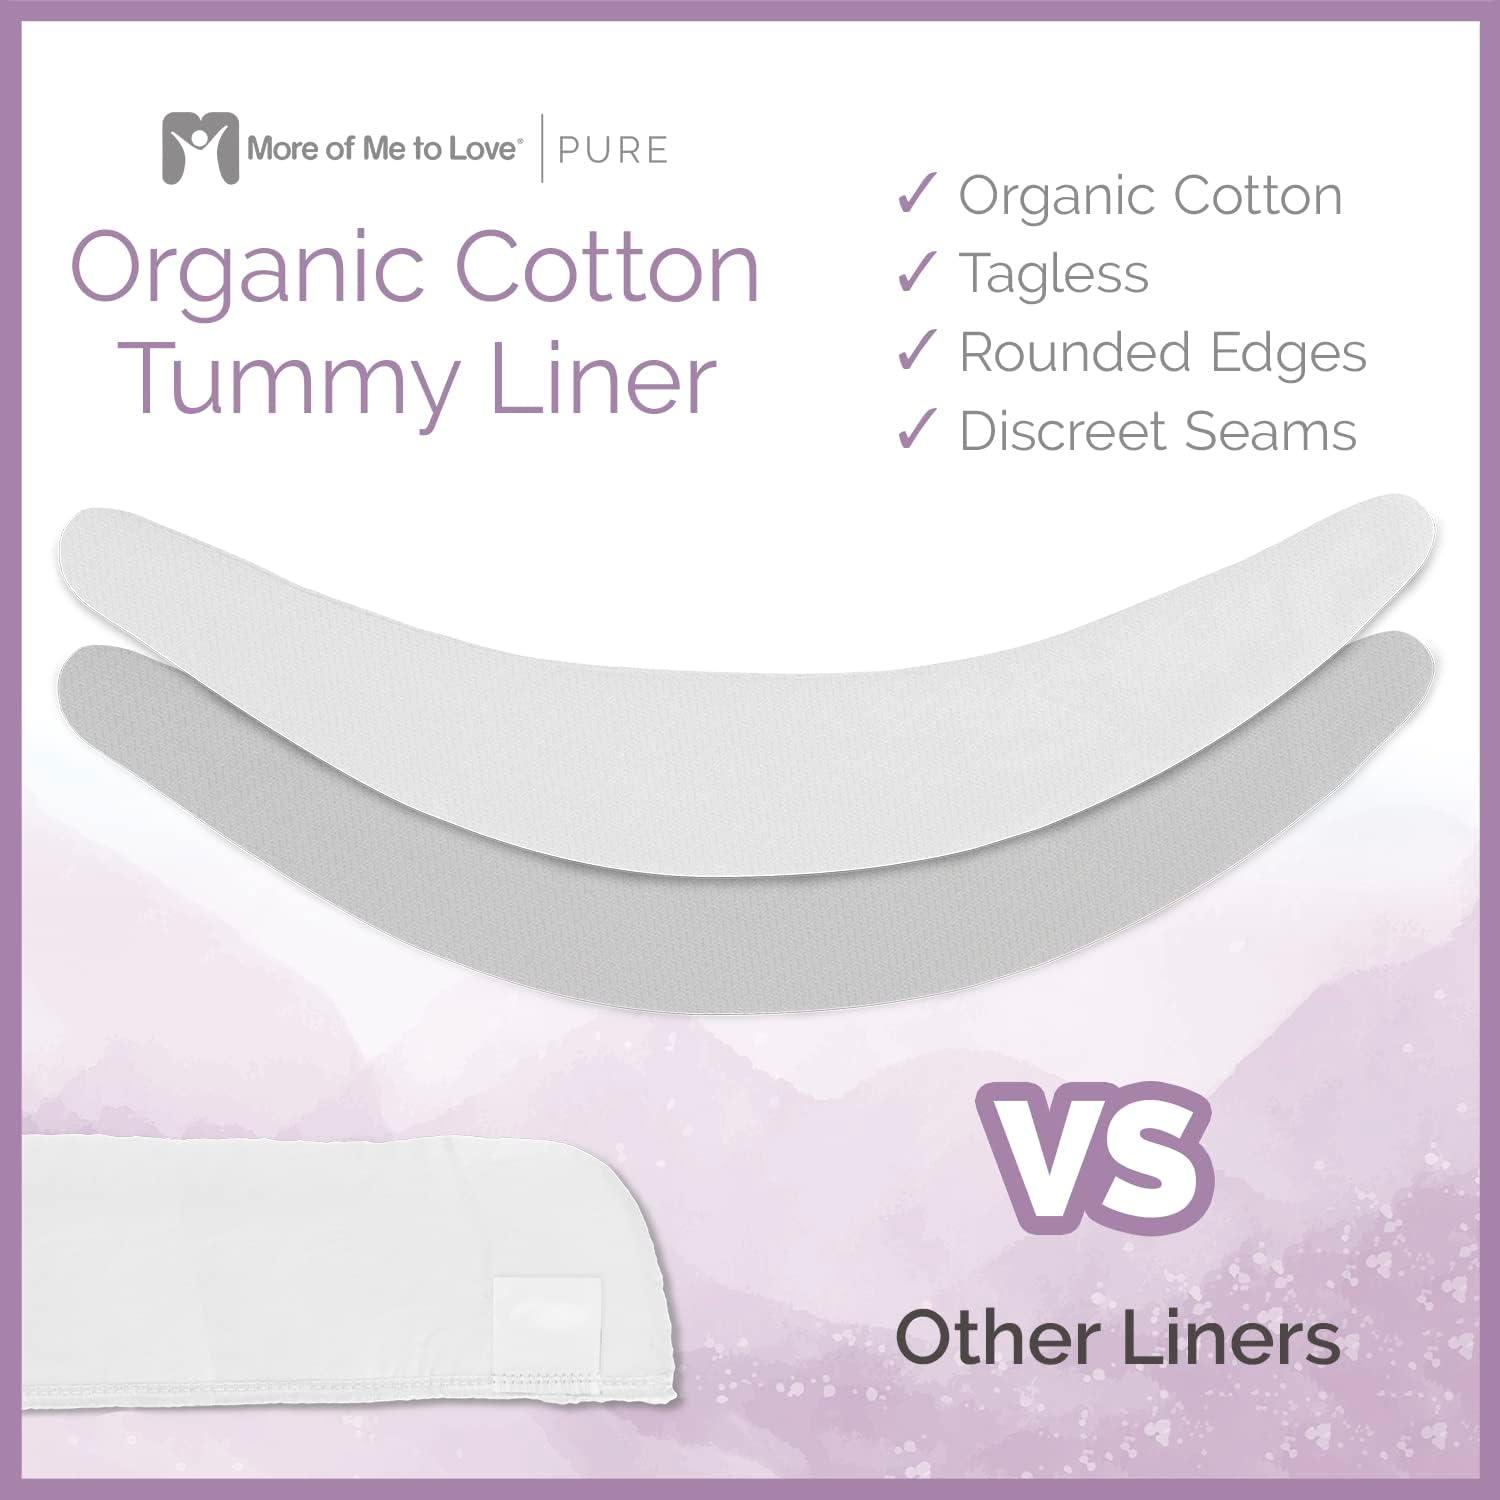 More of Me to Love Organic Cotton Tummy Liner 4-Pack XX-Large (2 x Pearl  White and 2 x Stone Gray)